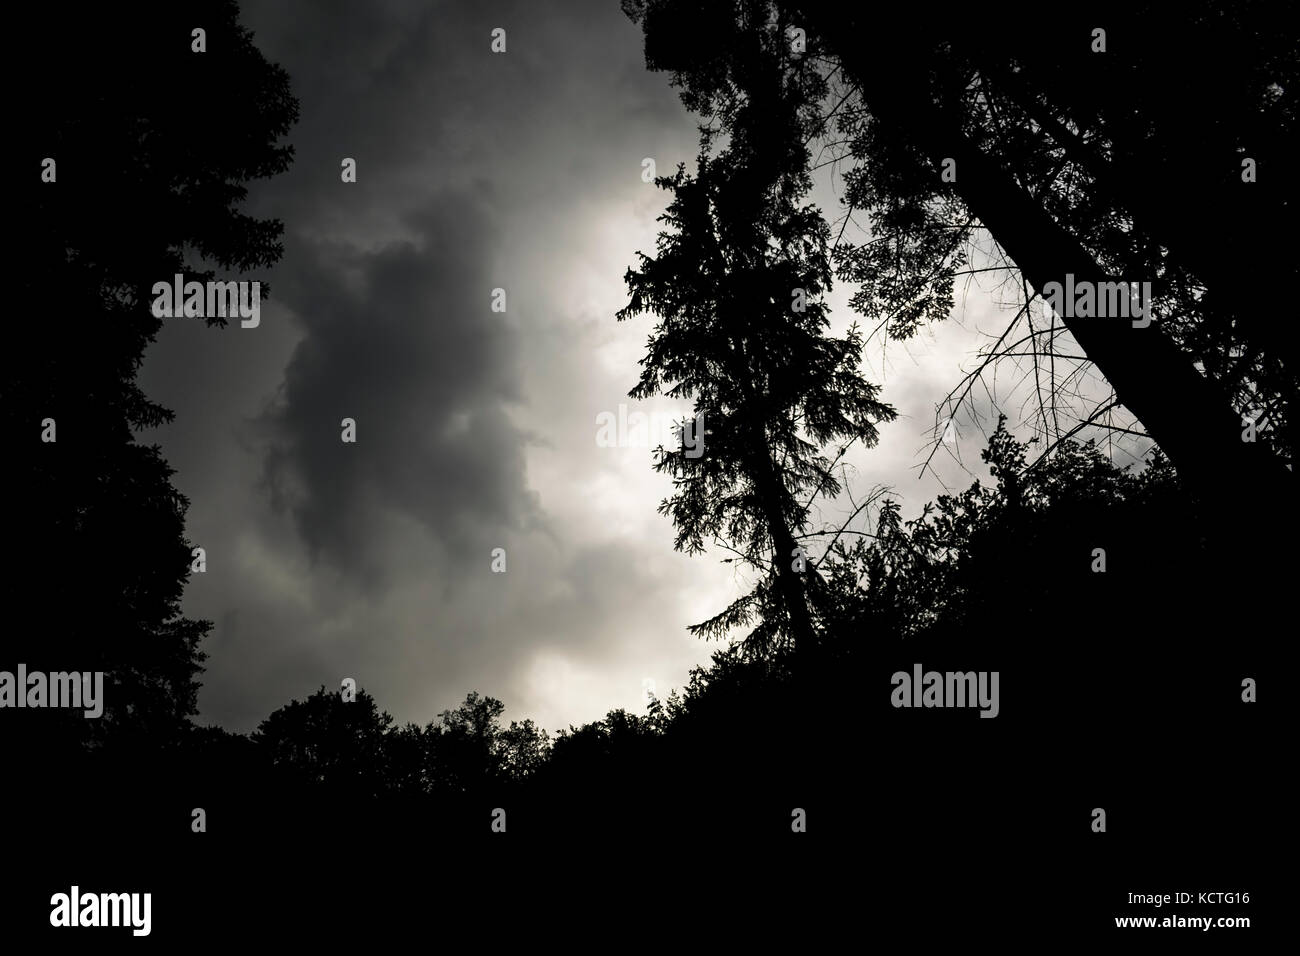 Low Angle View Of Pine Tree Silhouettes Against Stormy Sky Stock Photo